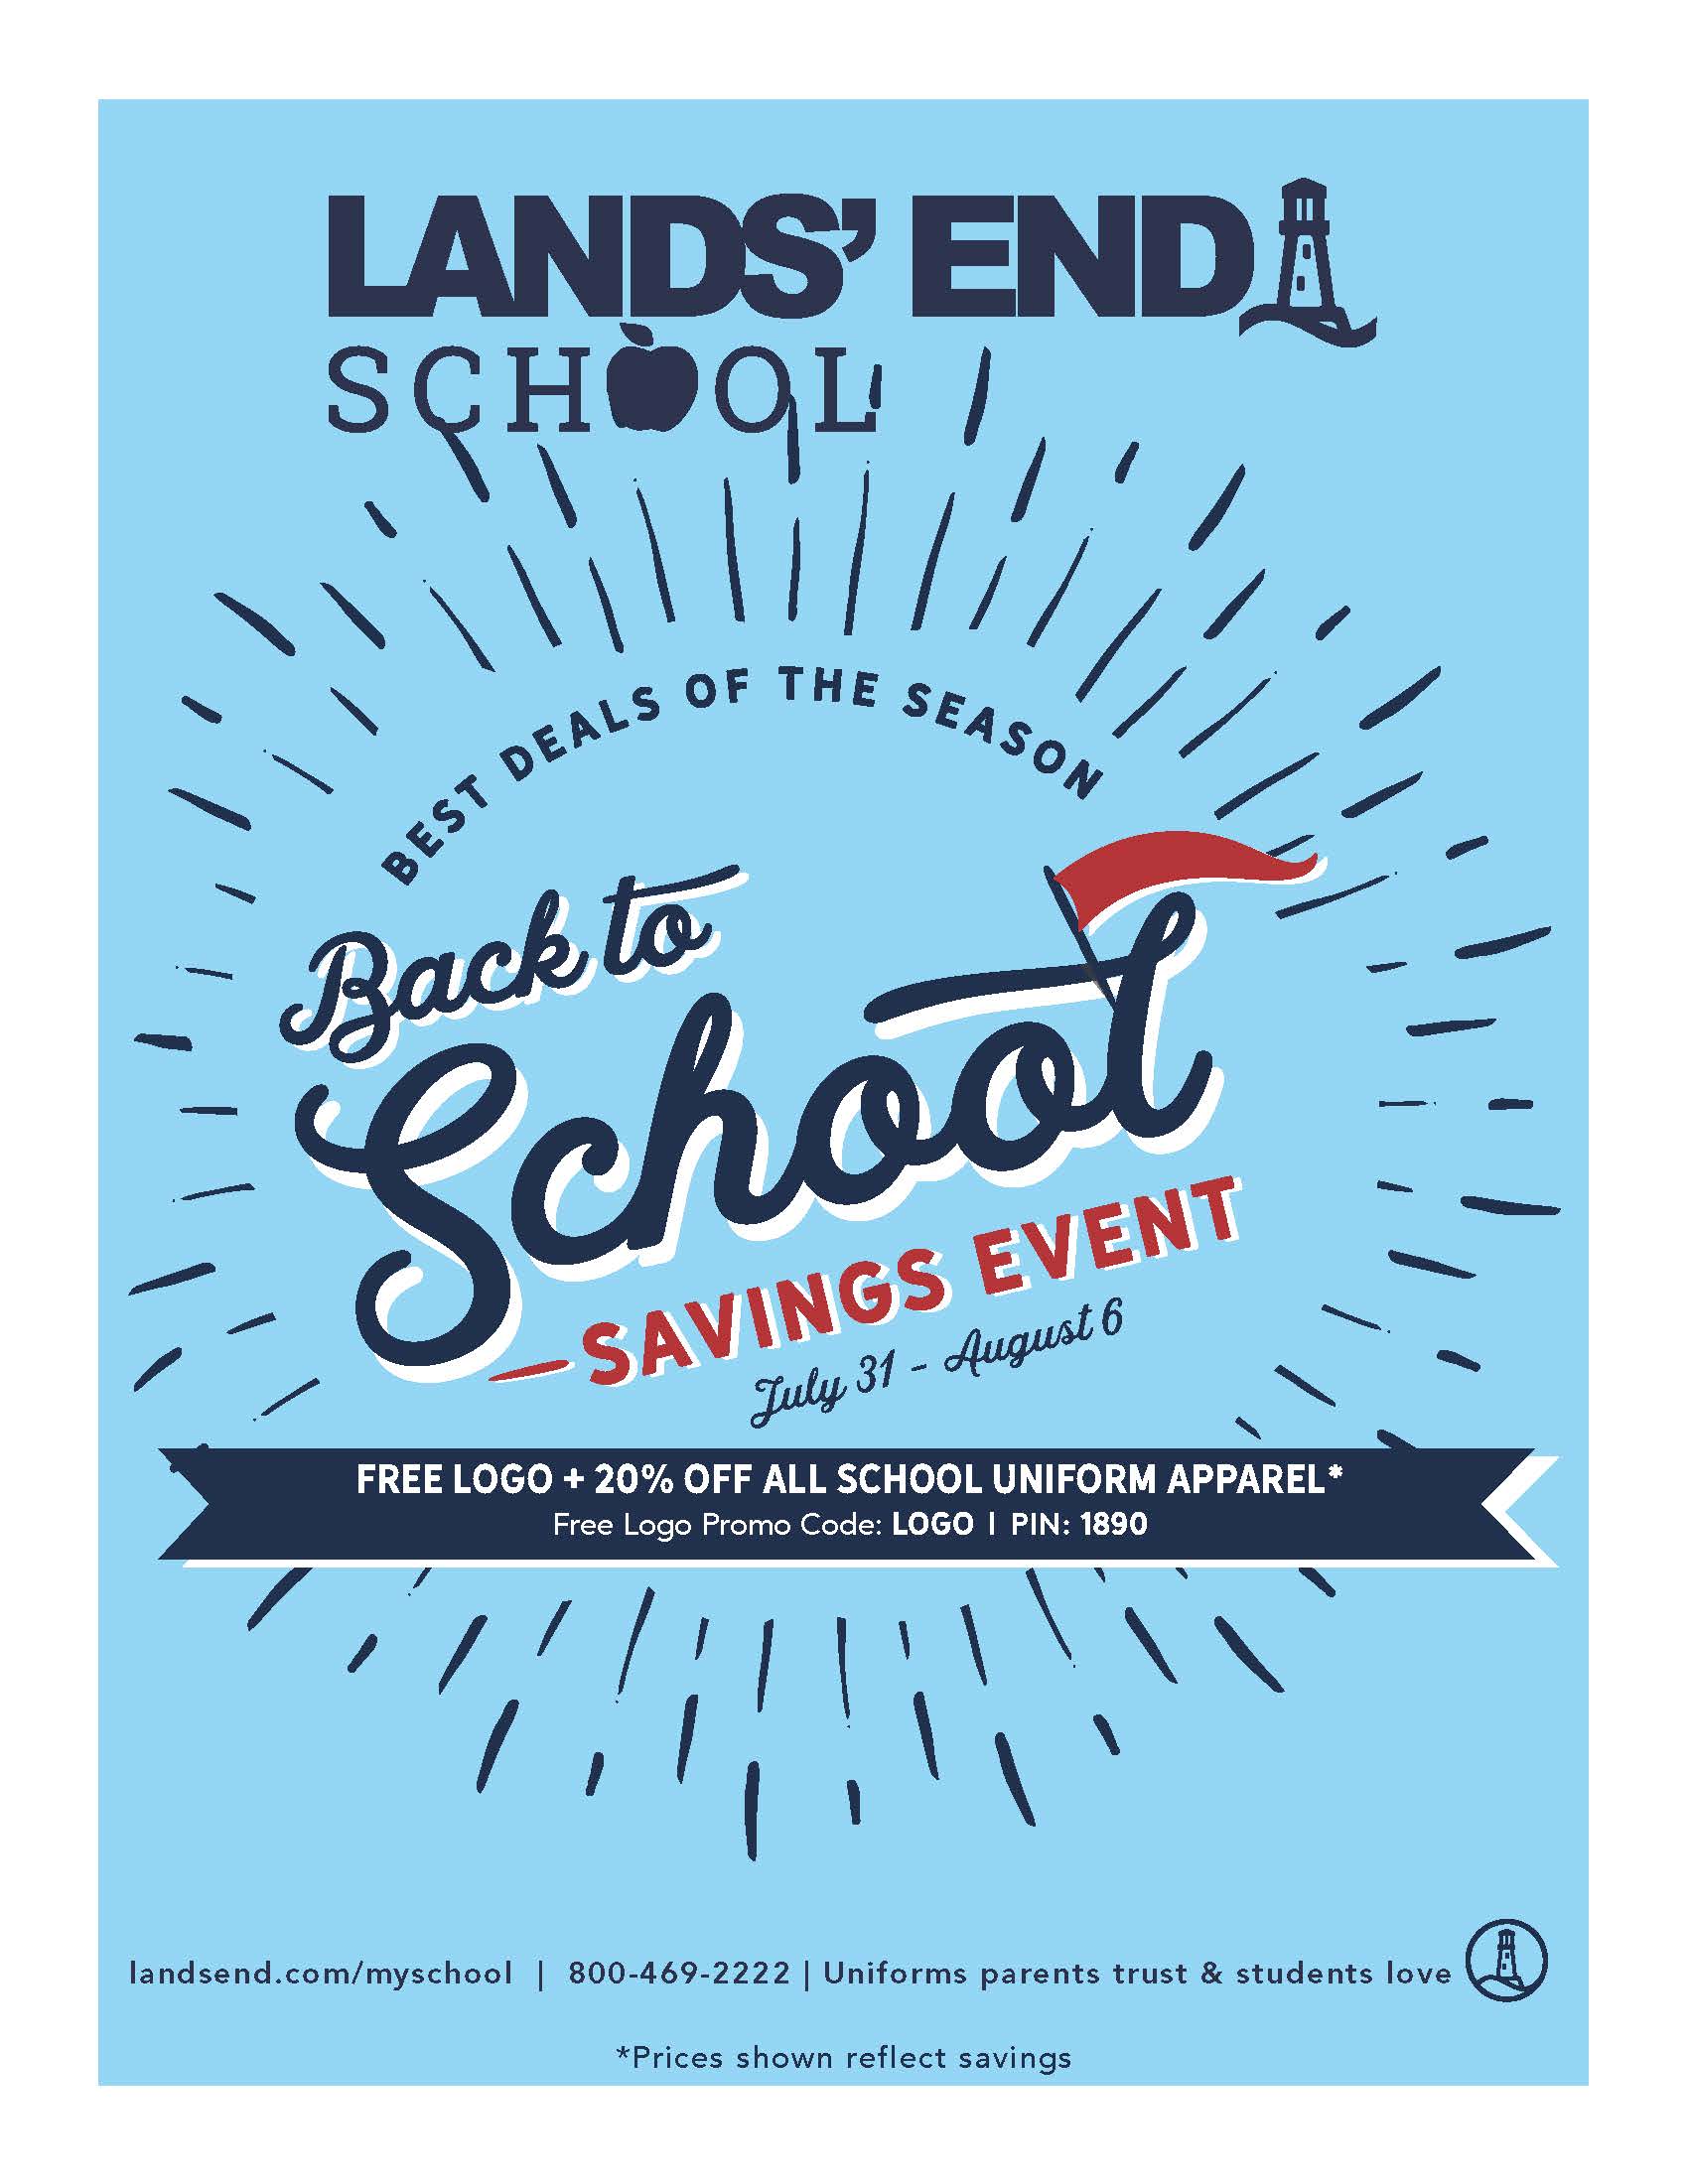 Christian Academy School System | Lands' End Back to School Savings Event | July 31 - August 6